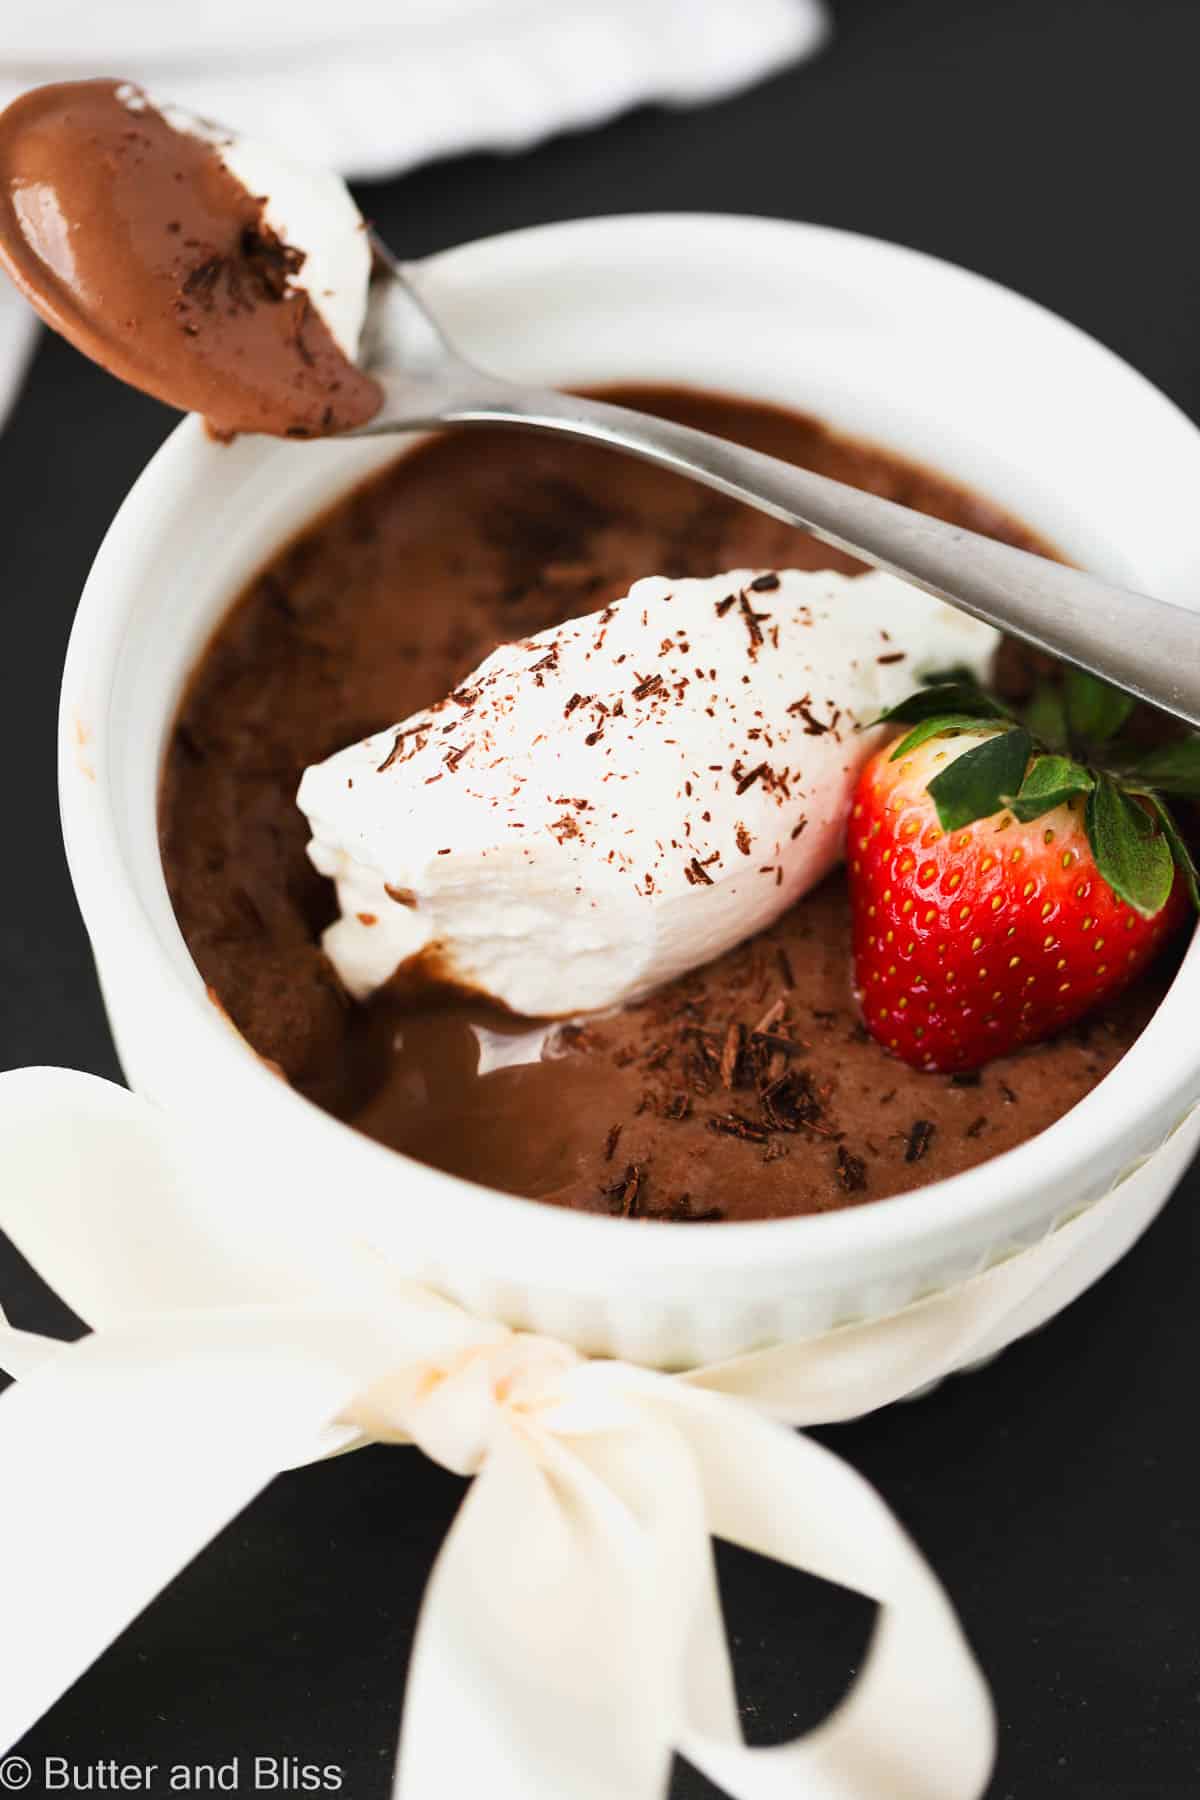 Creamy chocolate pots de creme topped with whipped cream in a white bowl.